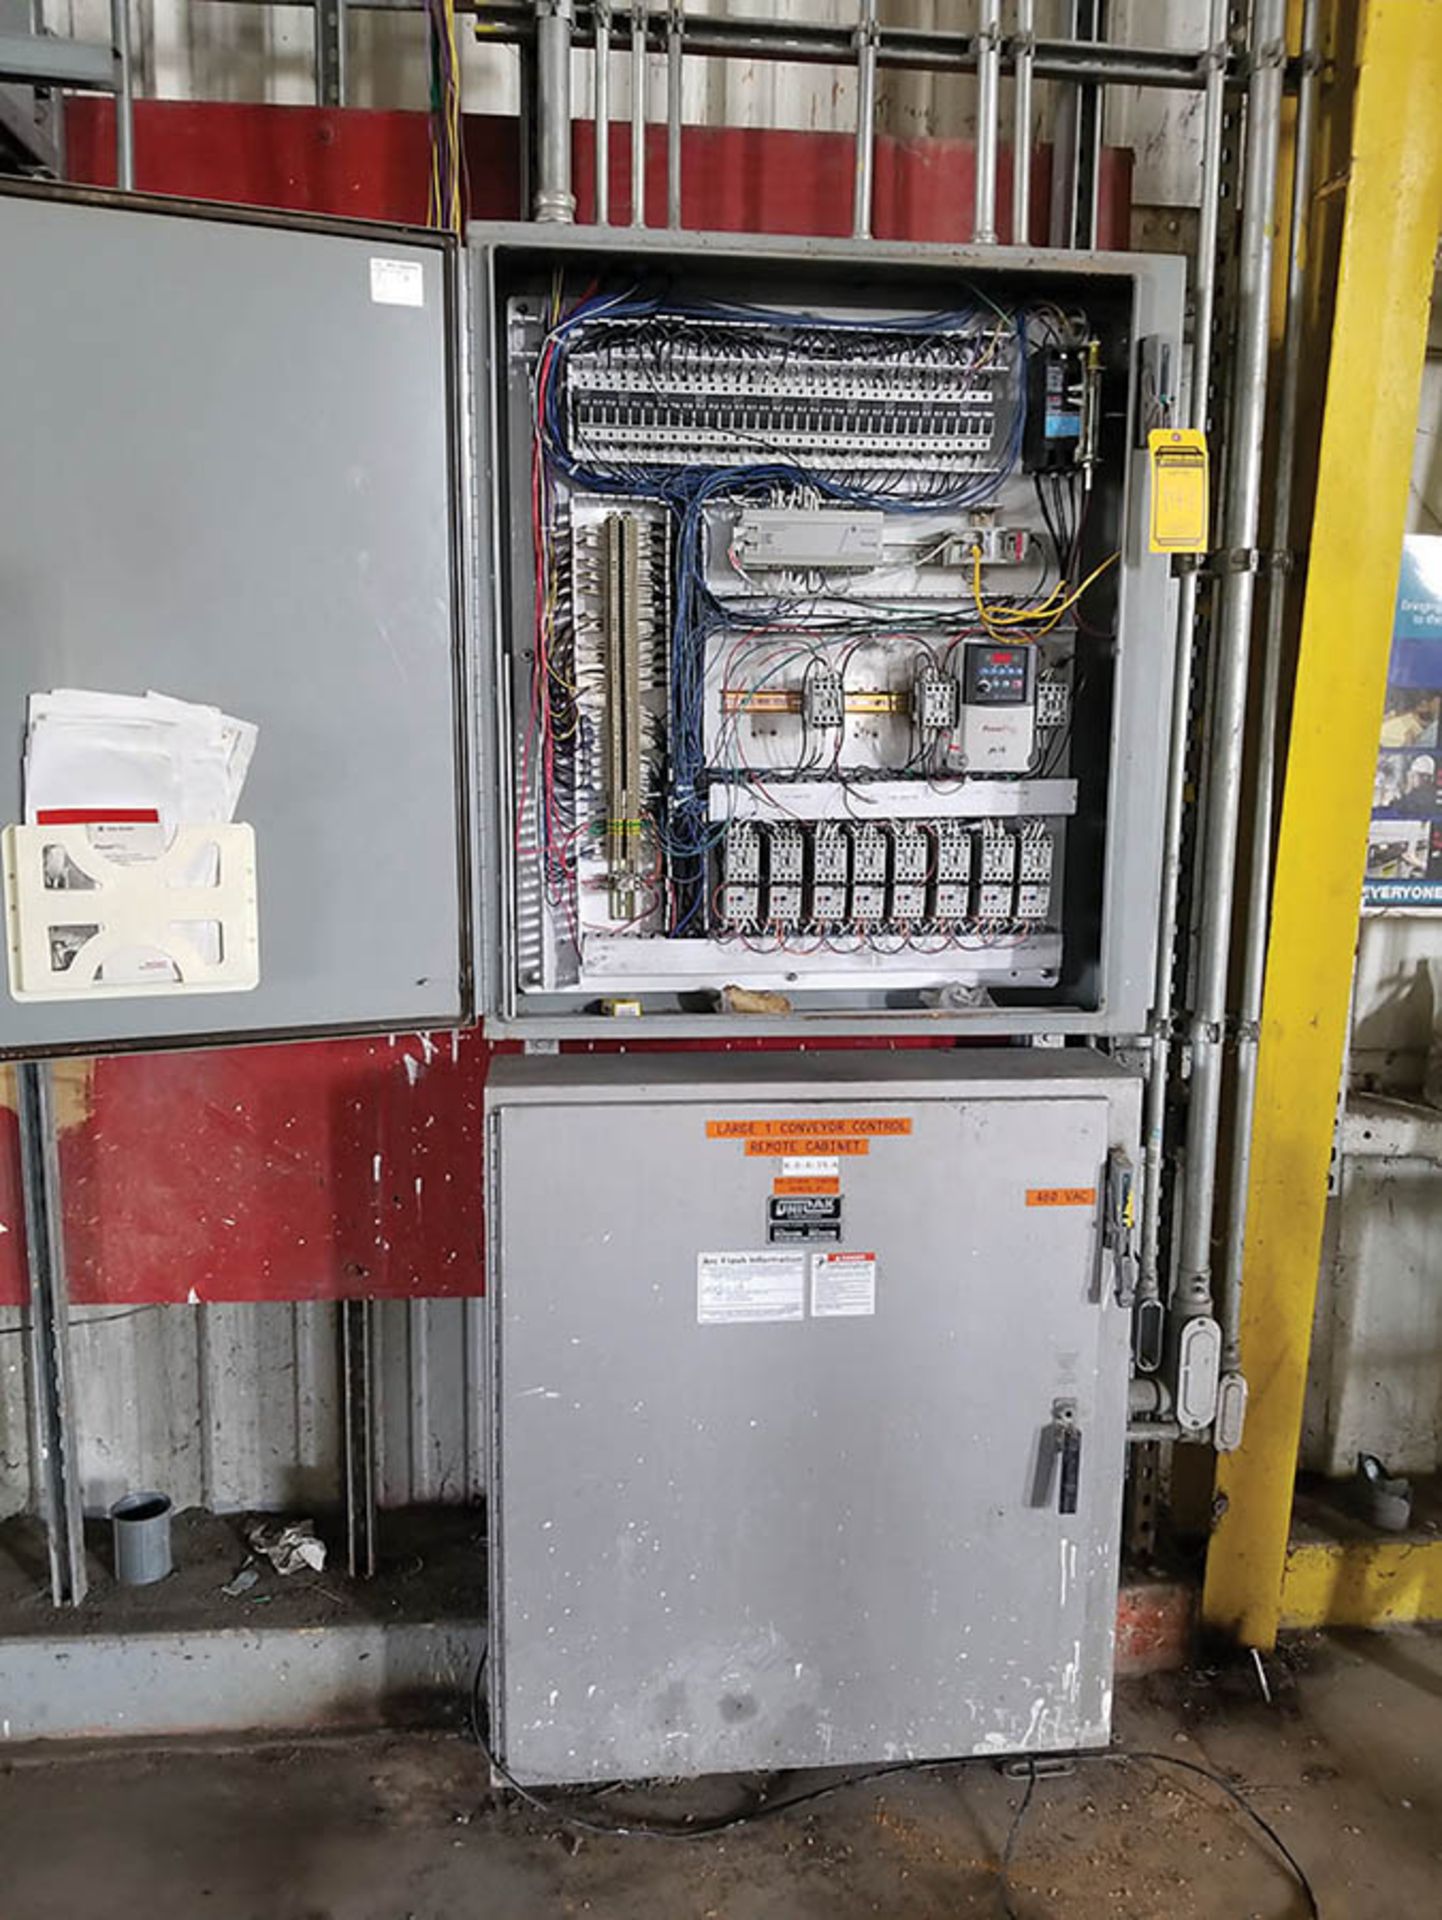 ALL ELECTRICAL CONTROL PANELS USED TO RUN OVERHEAD CONVEYORS, MCC'S, PLC'S, VOLTAGE STABILIZERS, PLC - Image 6 of 13